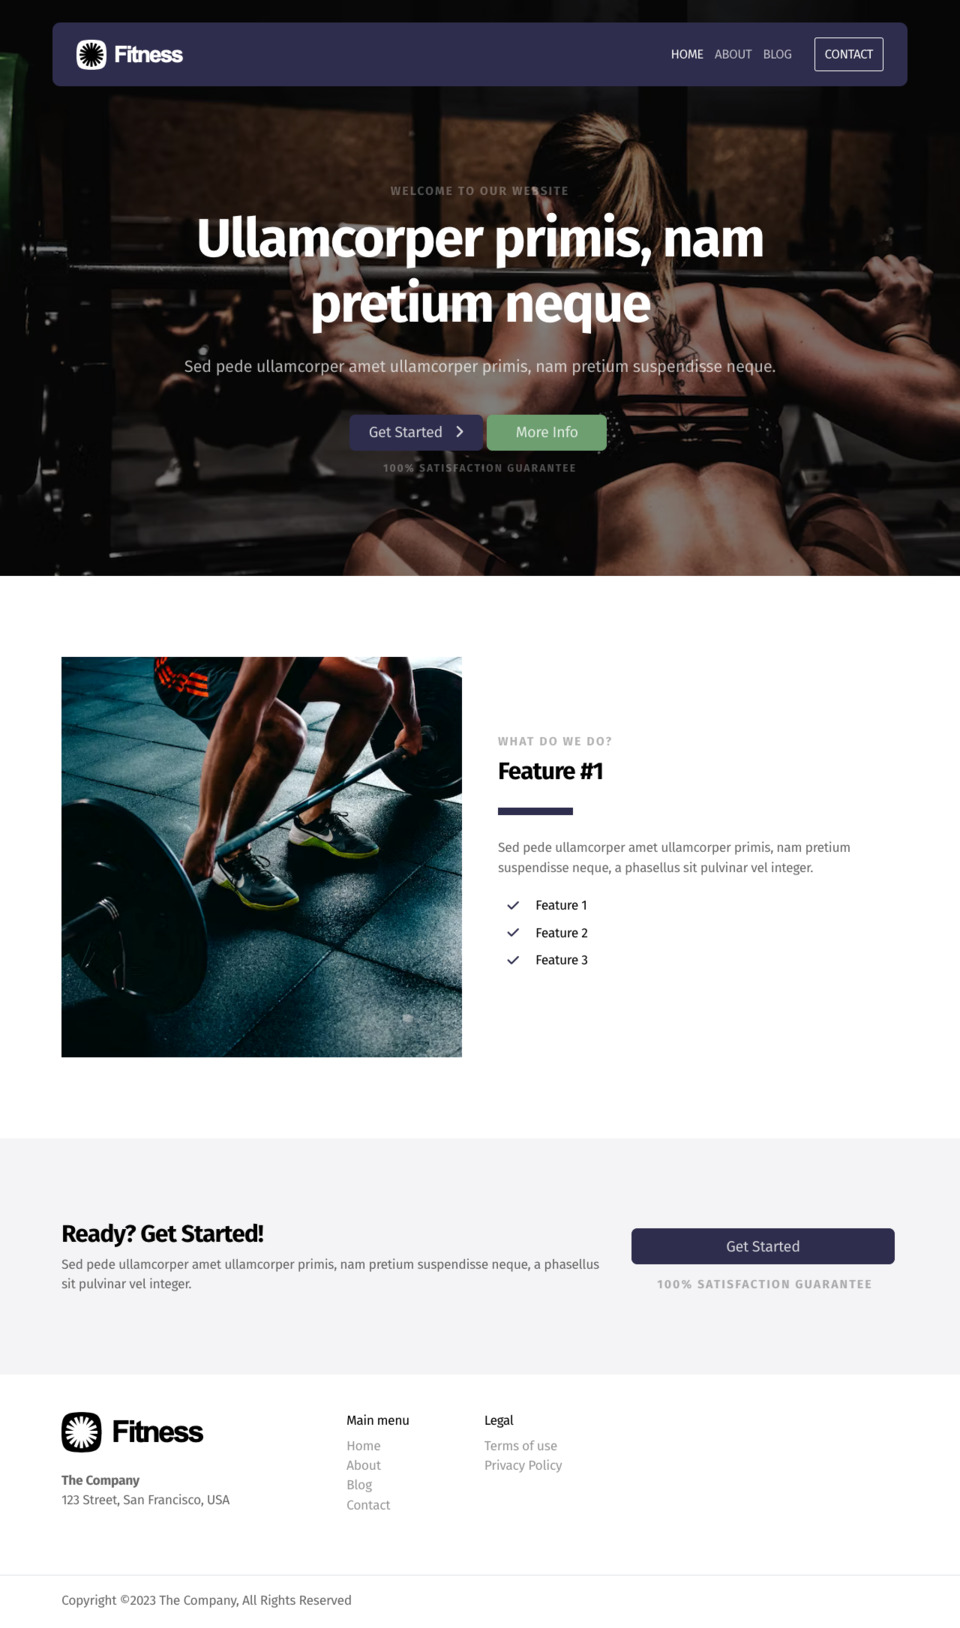 Gym Website Template - Ideal for gyms, personal trainers, health clubs, and fitness professionals looking to create a professional online presence.